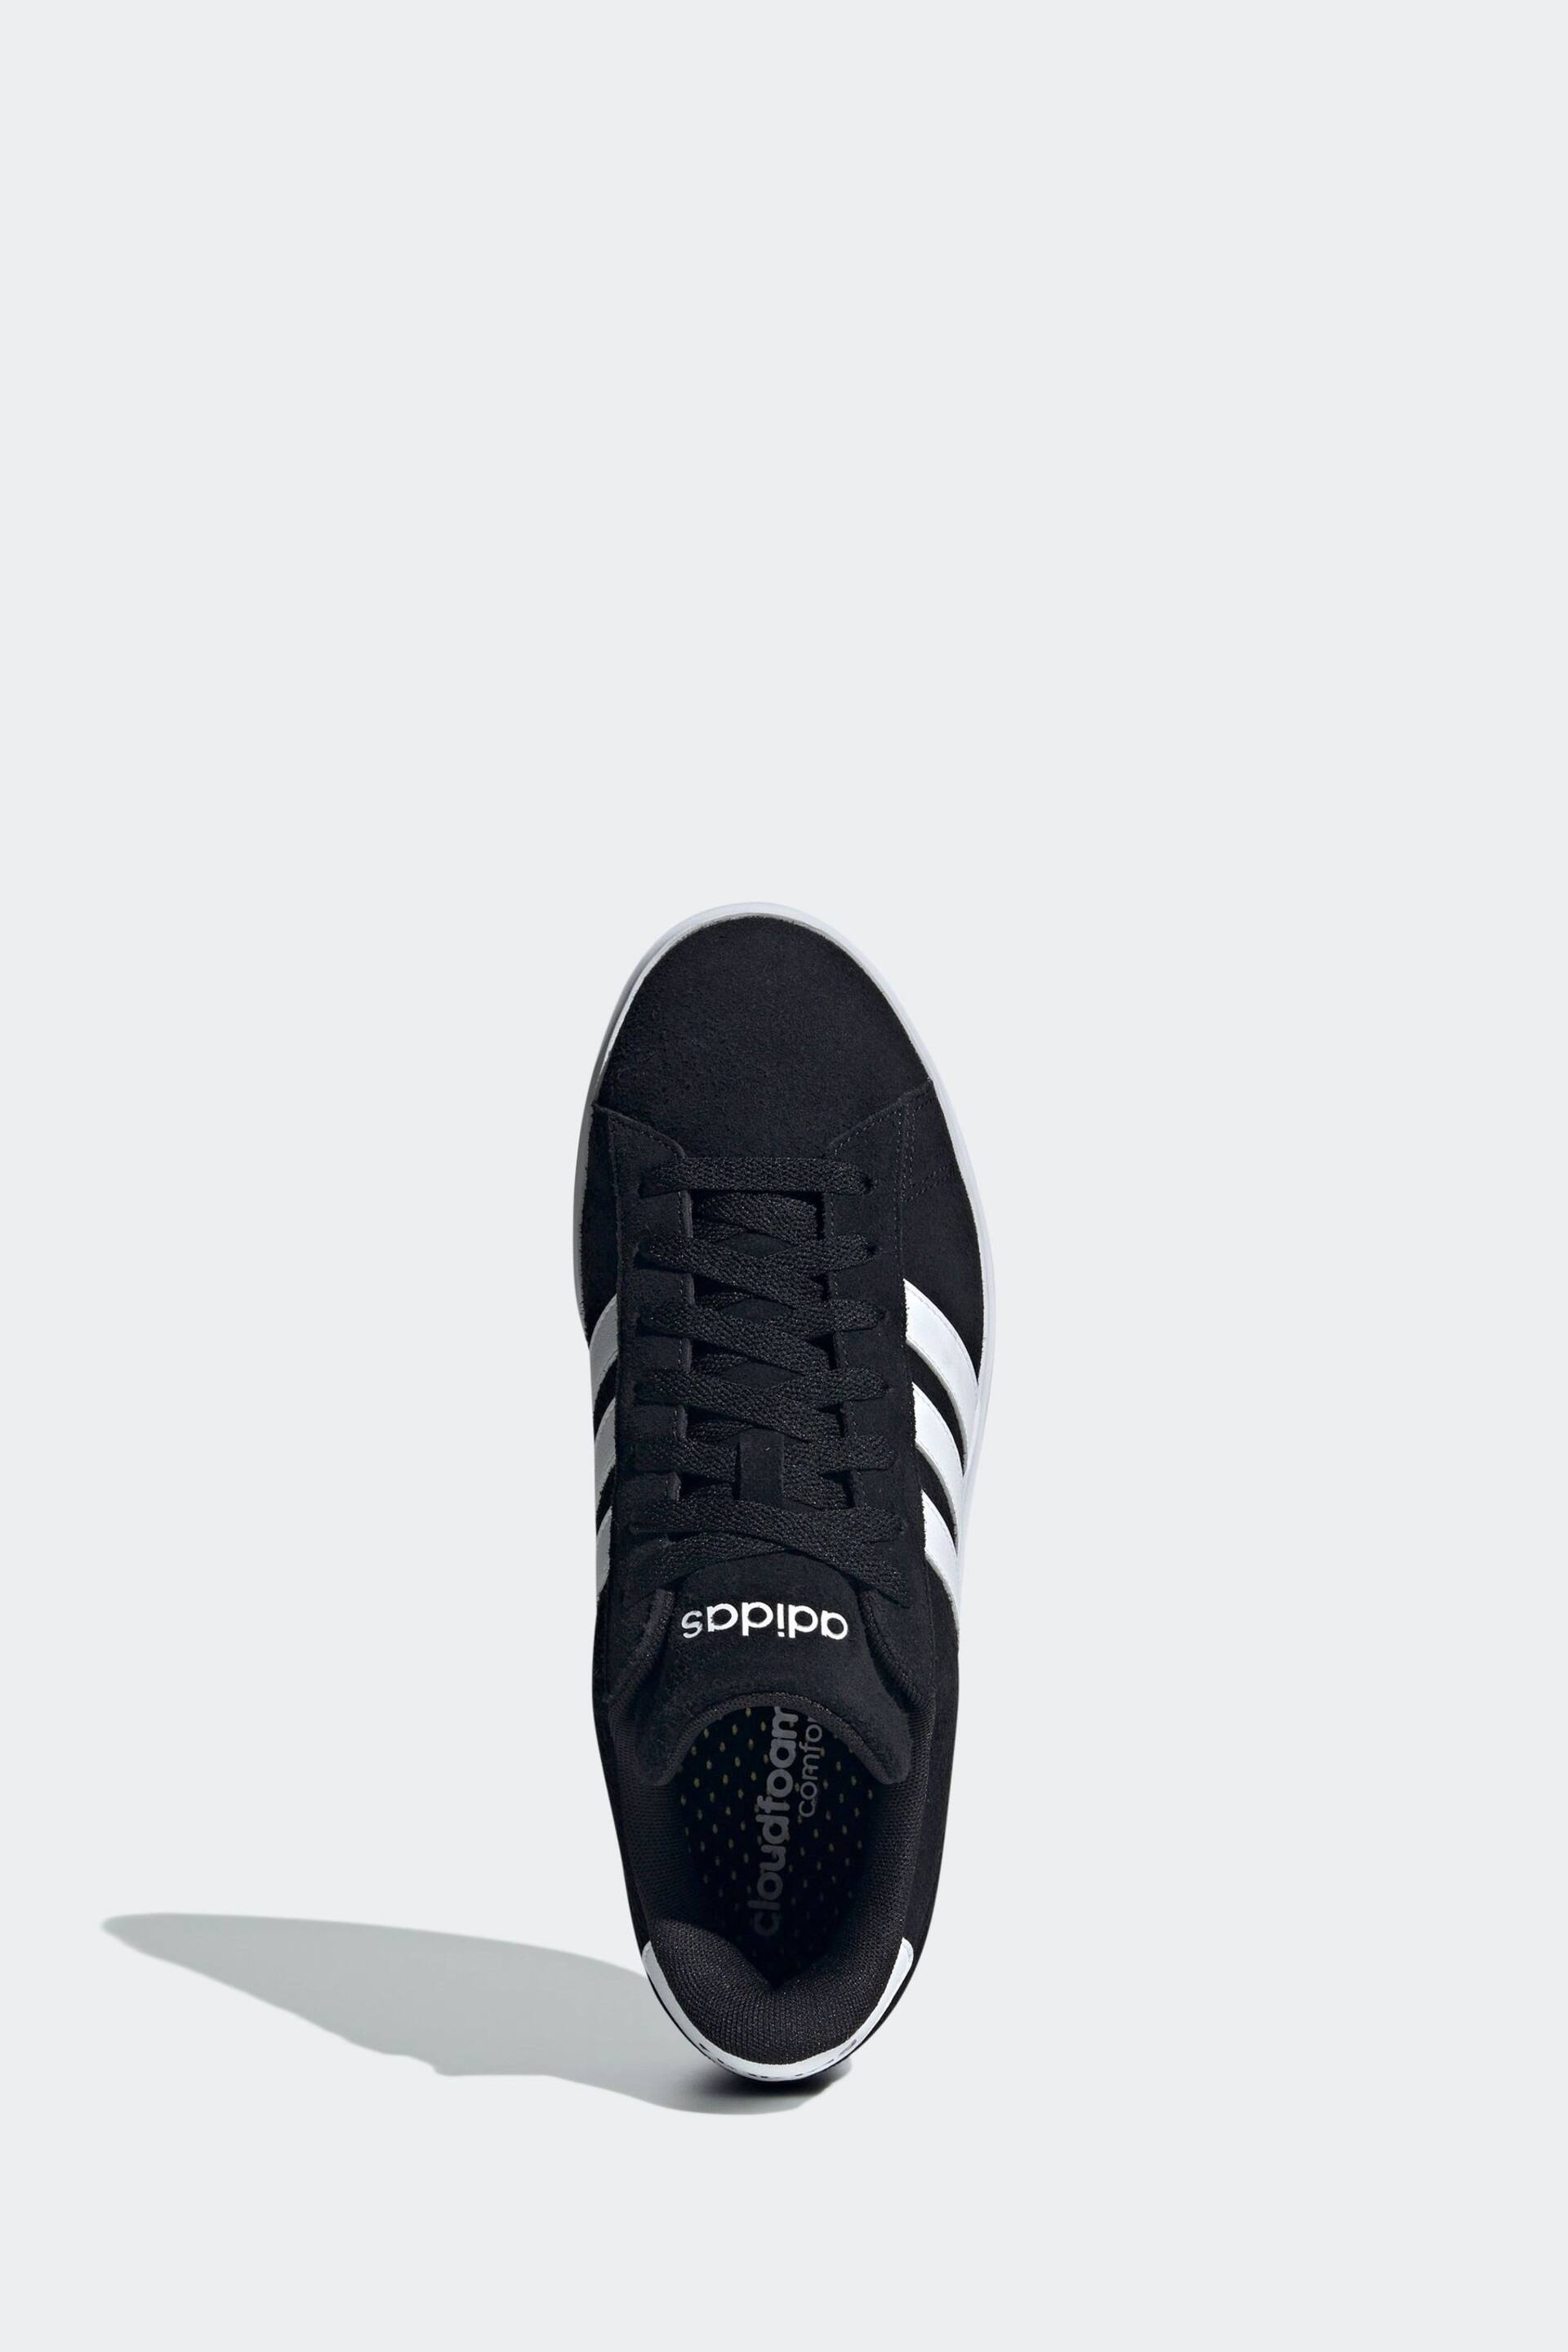 adidas Black Sportswear Grand Court 2.0 Trainers - Image 5 of 8